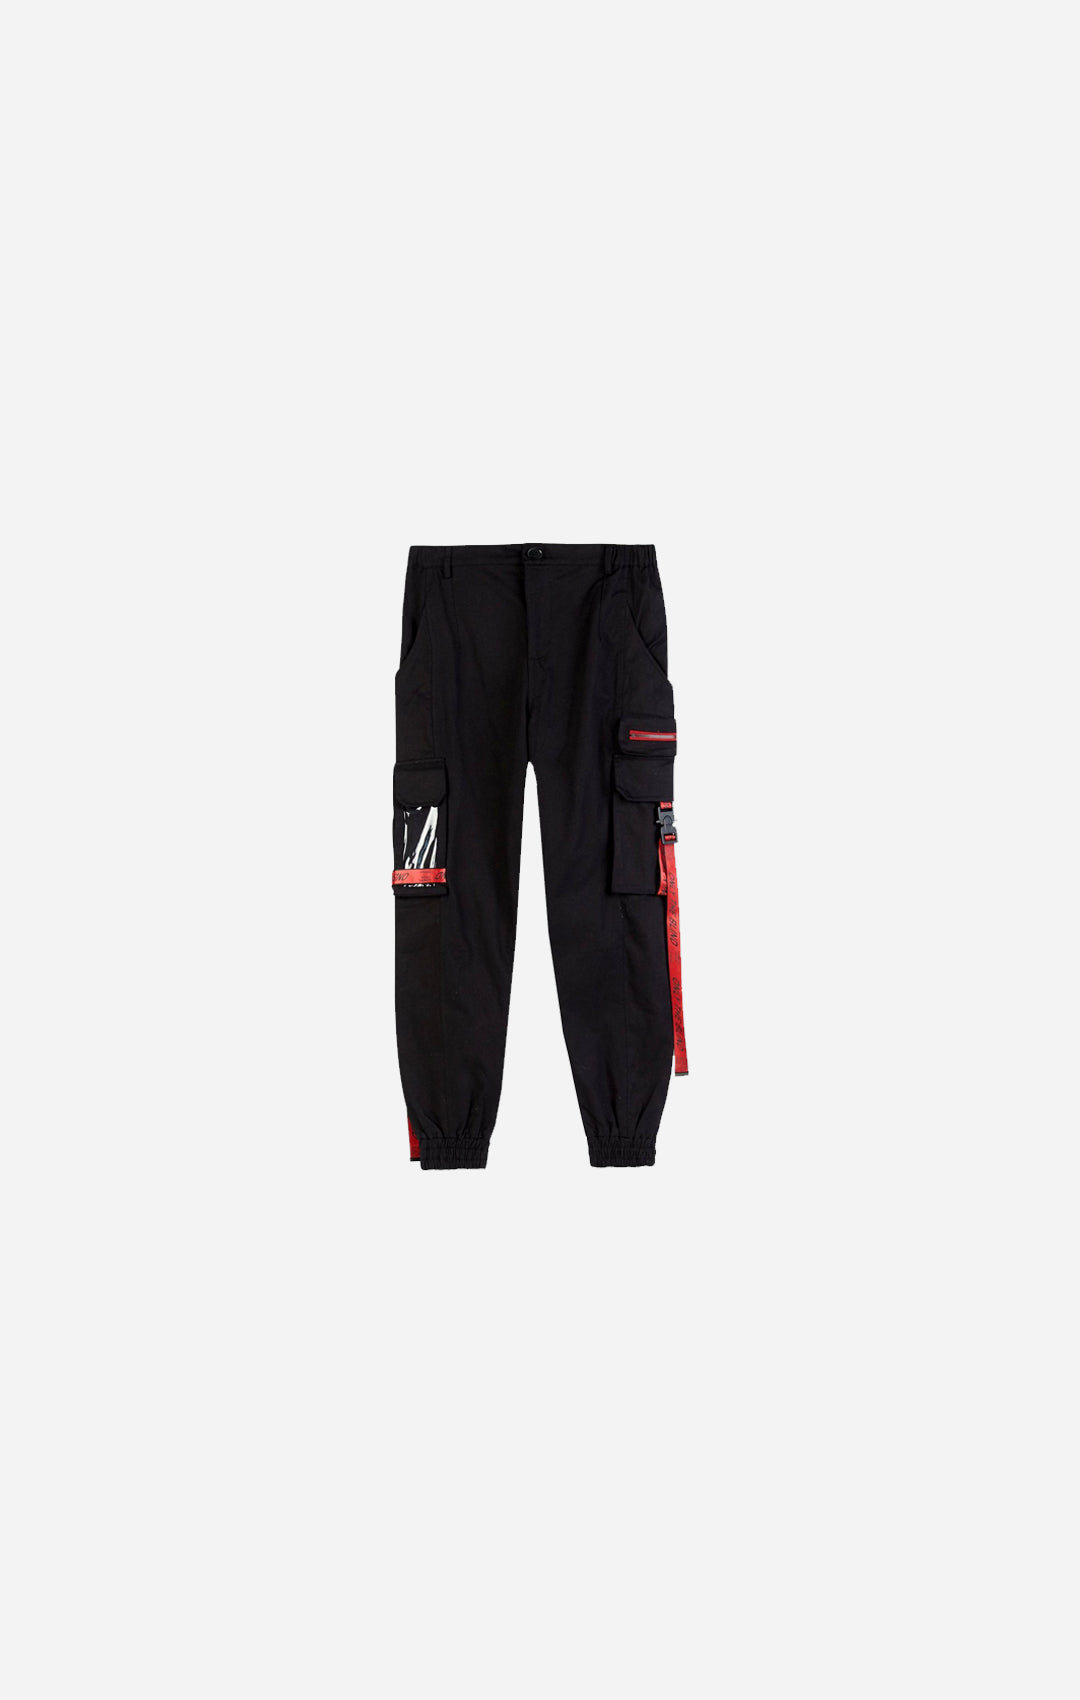 Black/Red Strapped Cargo Bottoms